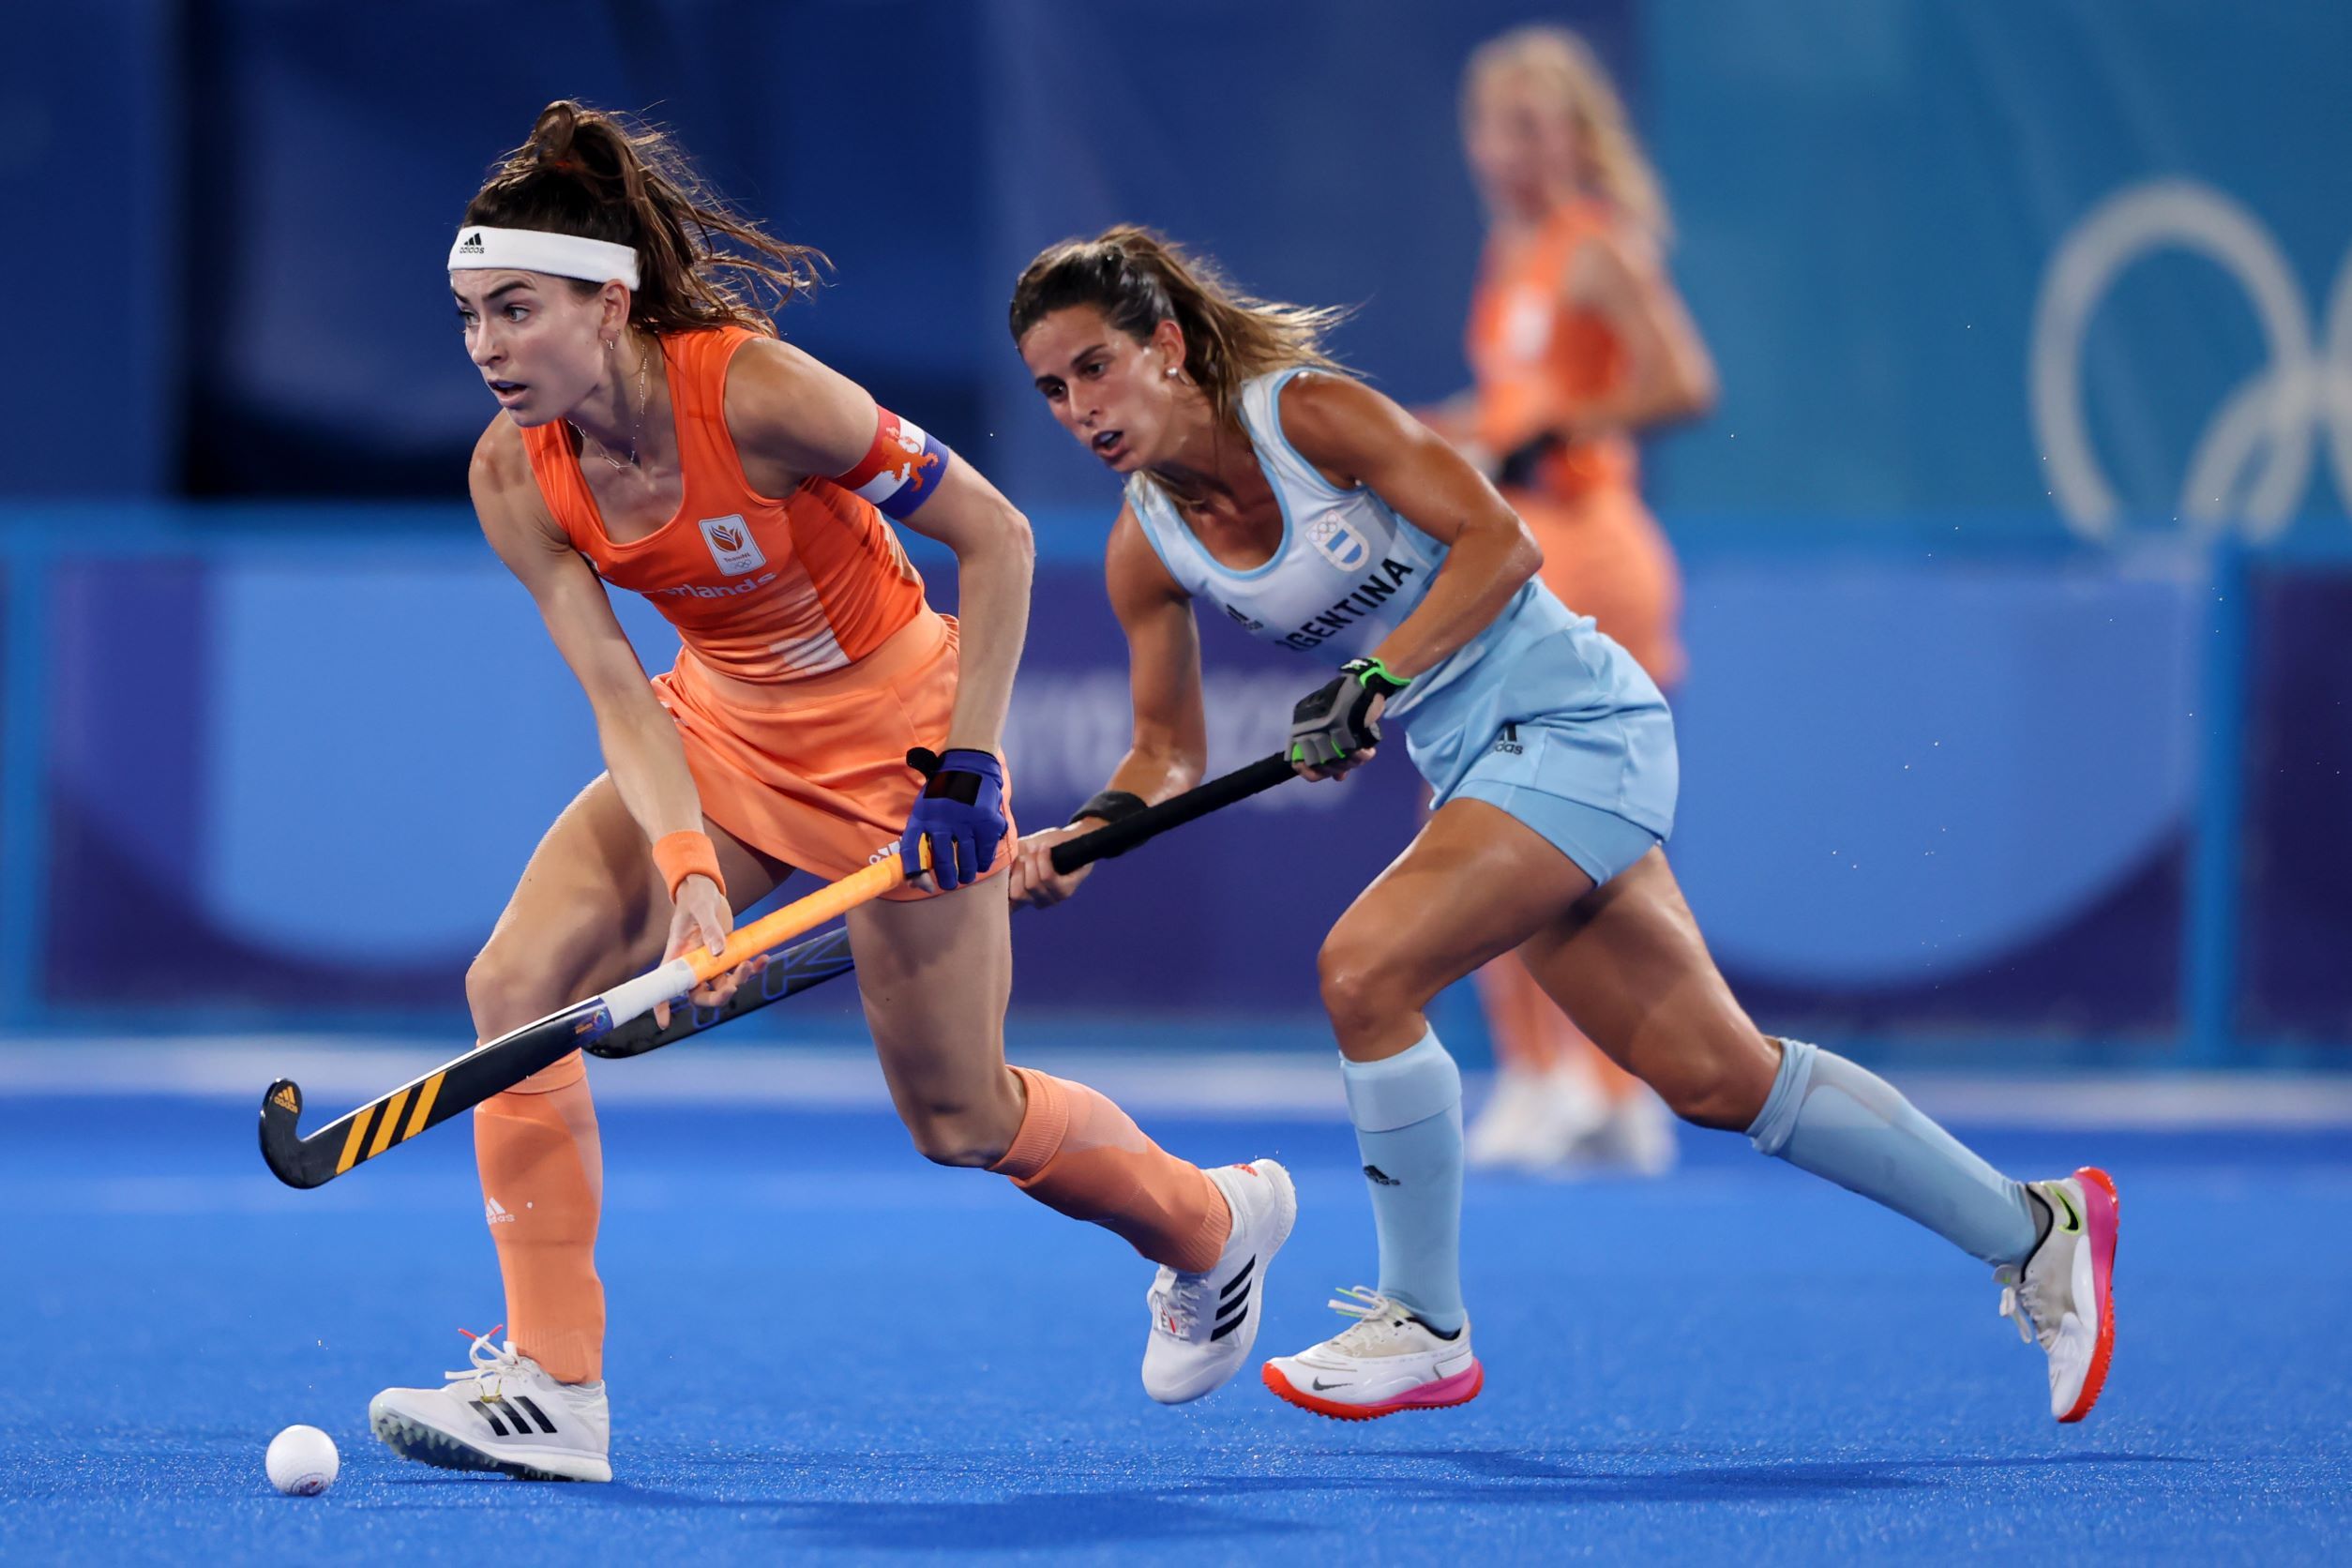 Netherlands tops Argentina for gold in women's field hockey